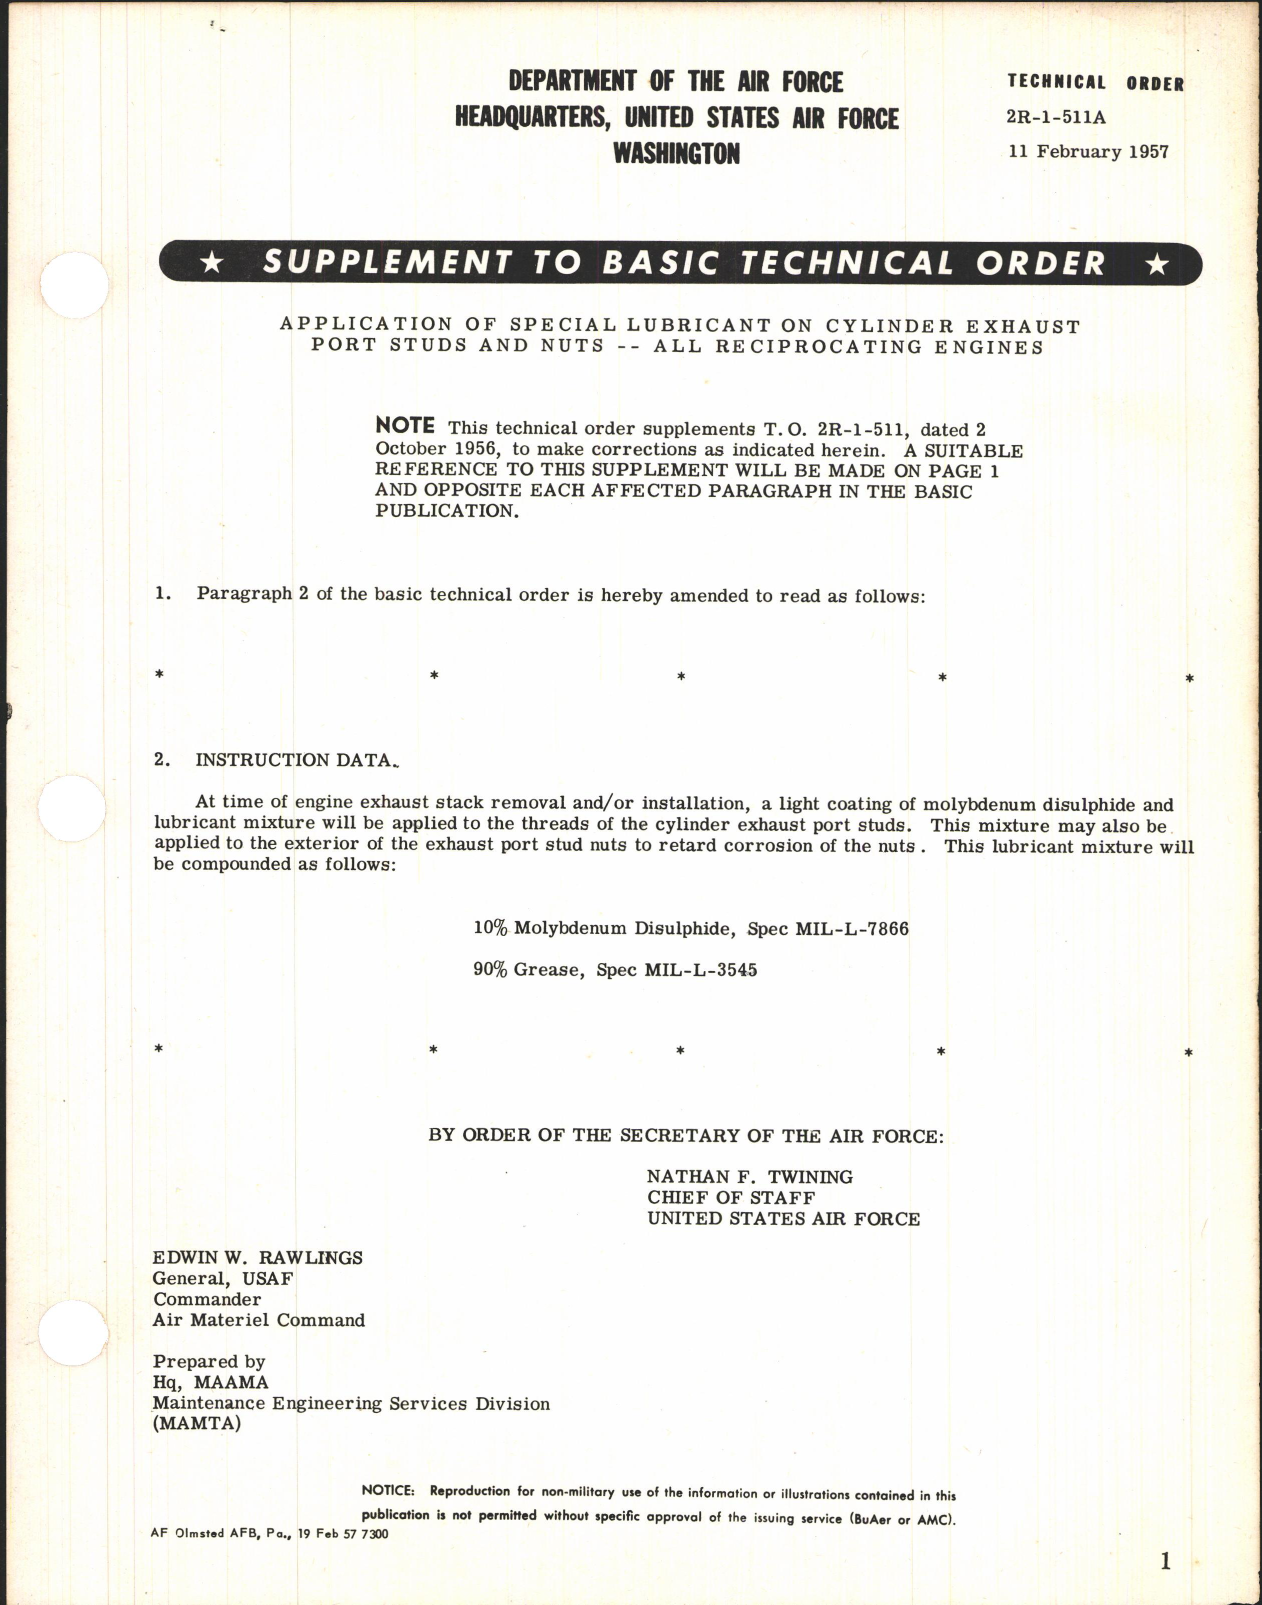 Sample page 1 from AirCorps Library document: Supplement to Basic Technical Order; Application of Special Lubricant on Cylinder Exhaust Port Studs and Nuts for All Reciprocating Engines